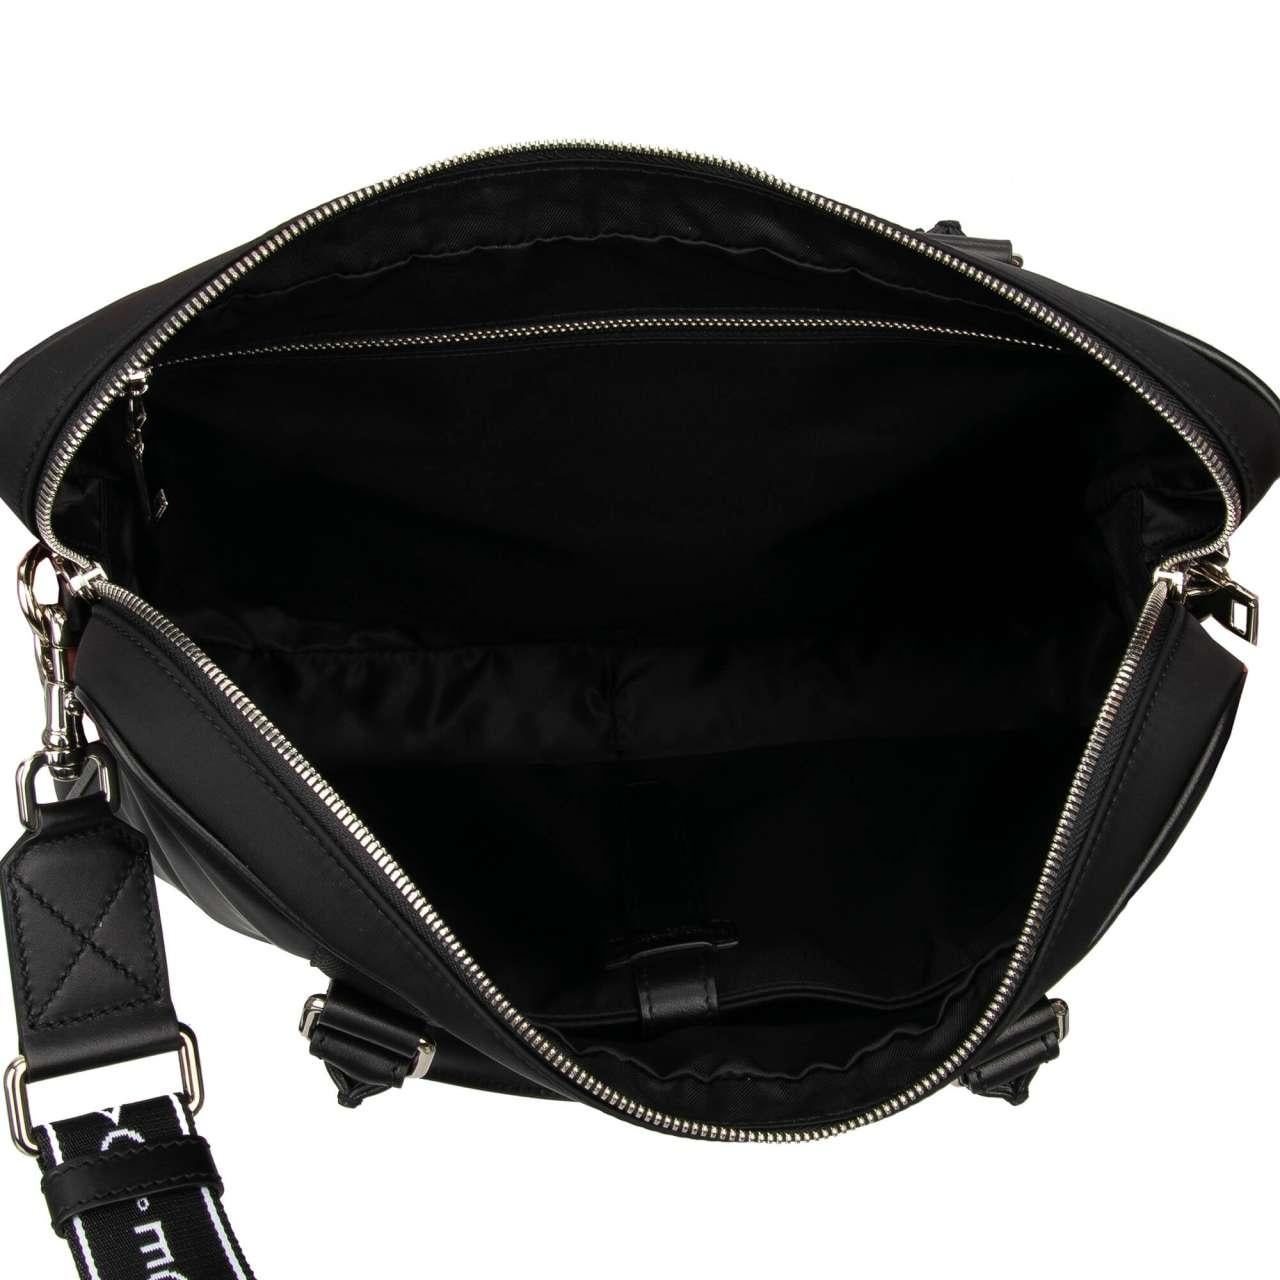 D&G - Nylon Laptop Briefcase with Leather Details and Logo Strap Black 2